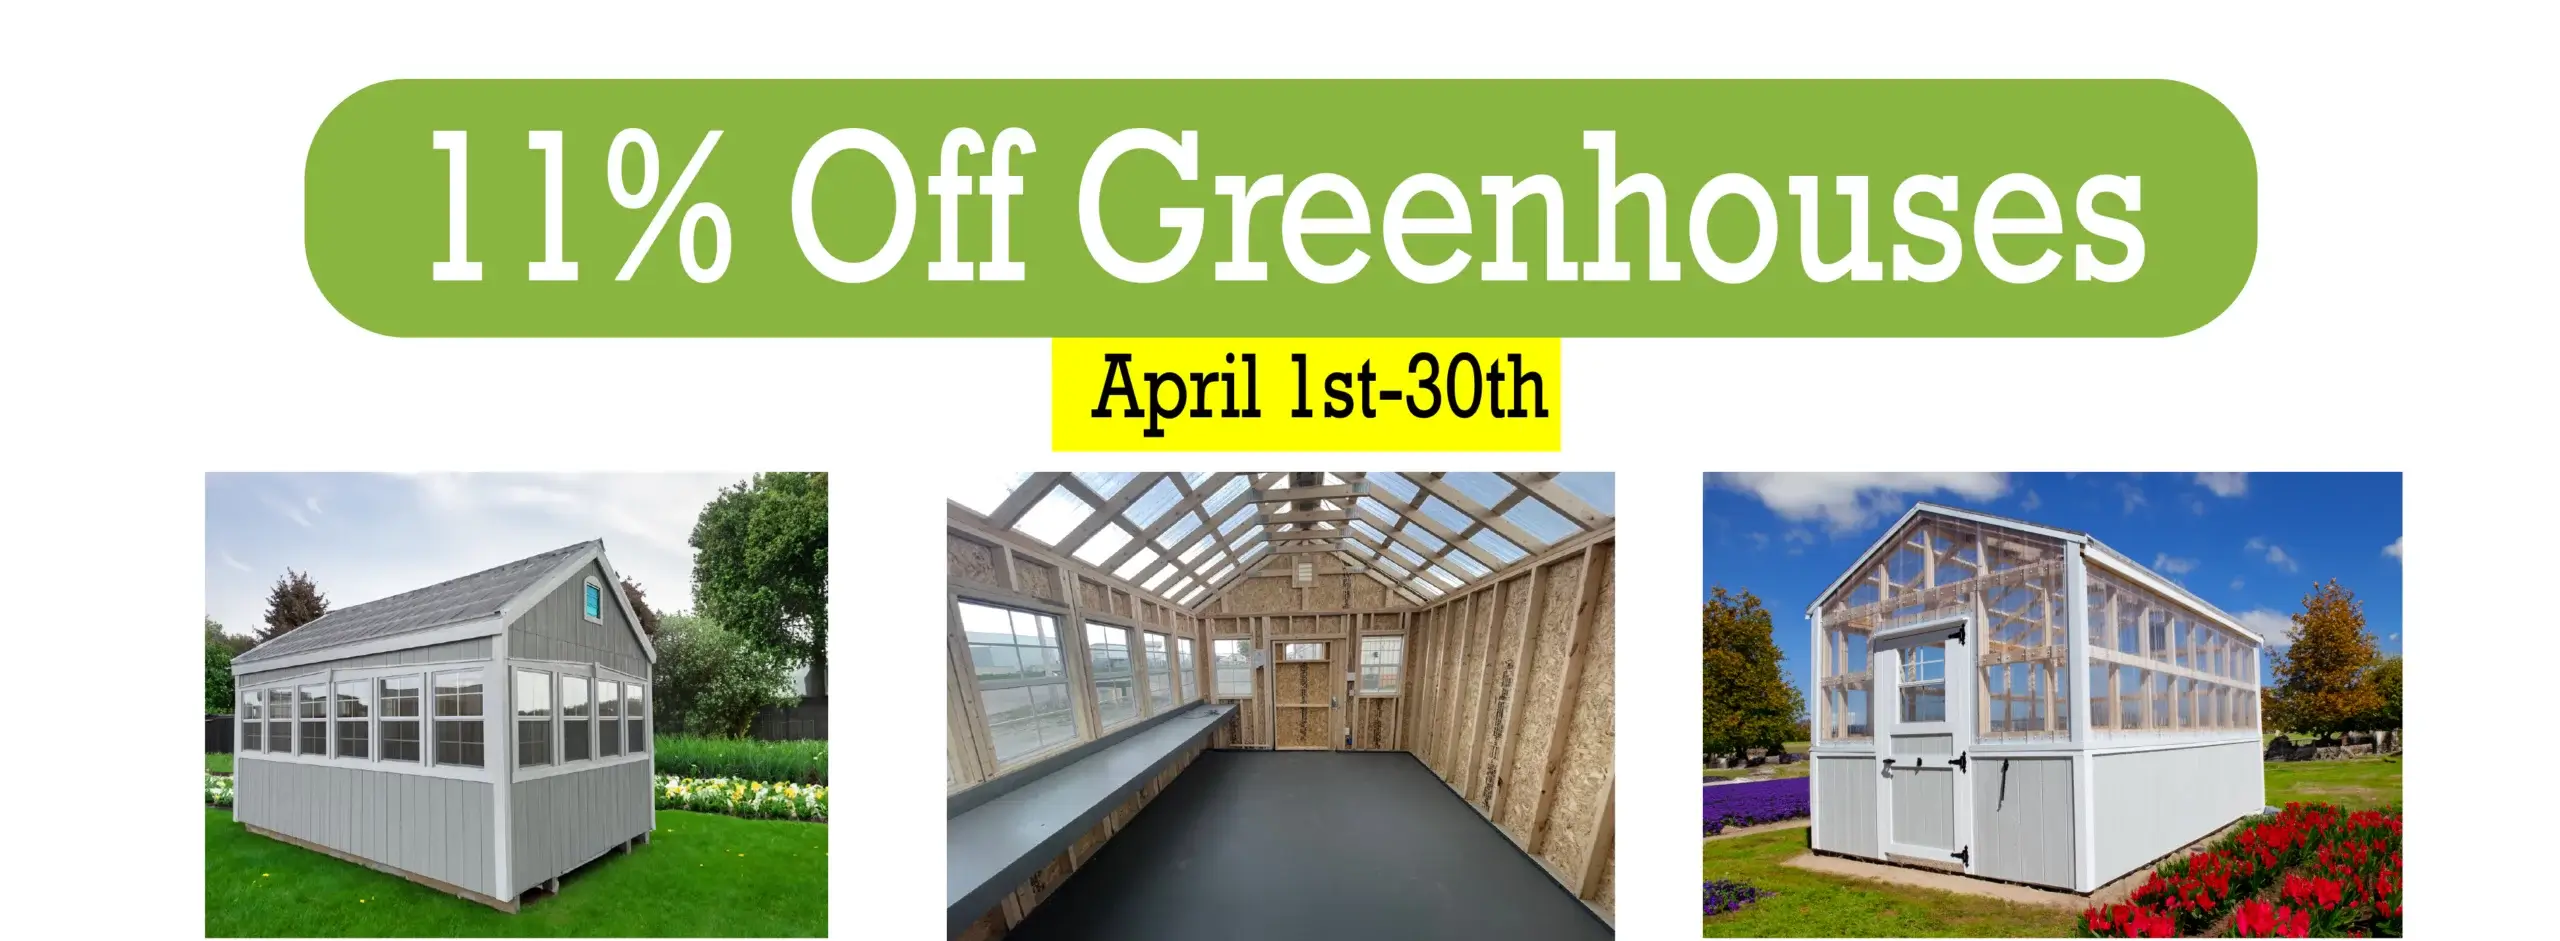 Green-house-april-promo-scaled